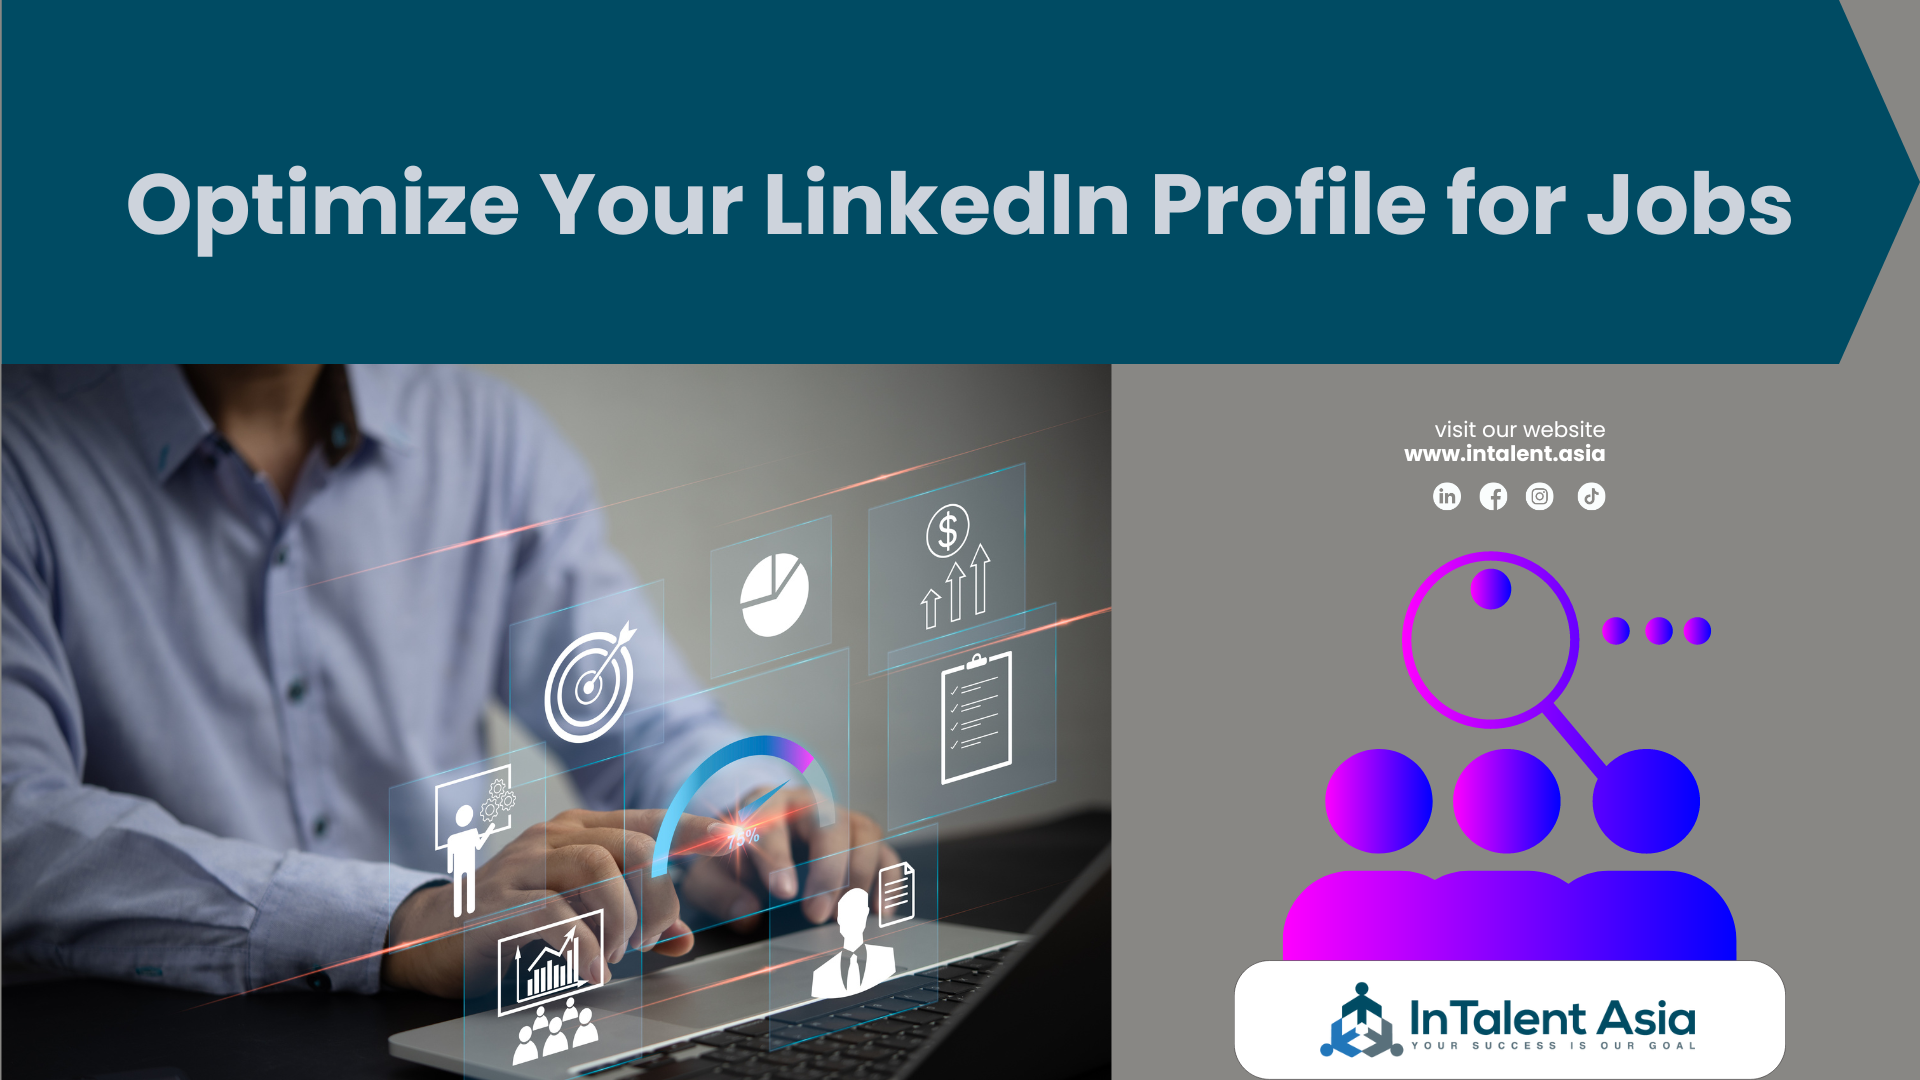 Tips to Optimize Your LinkedIn Profile for Job